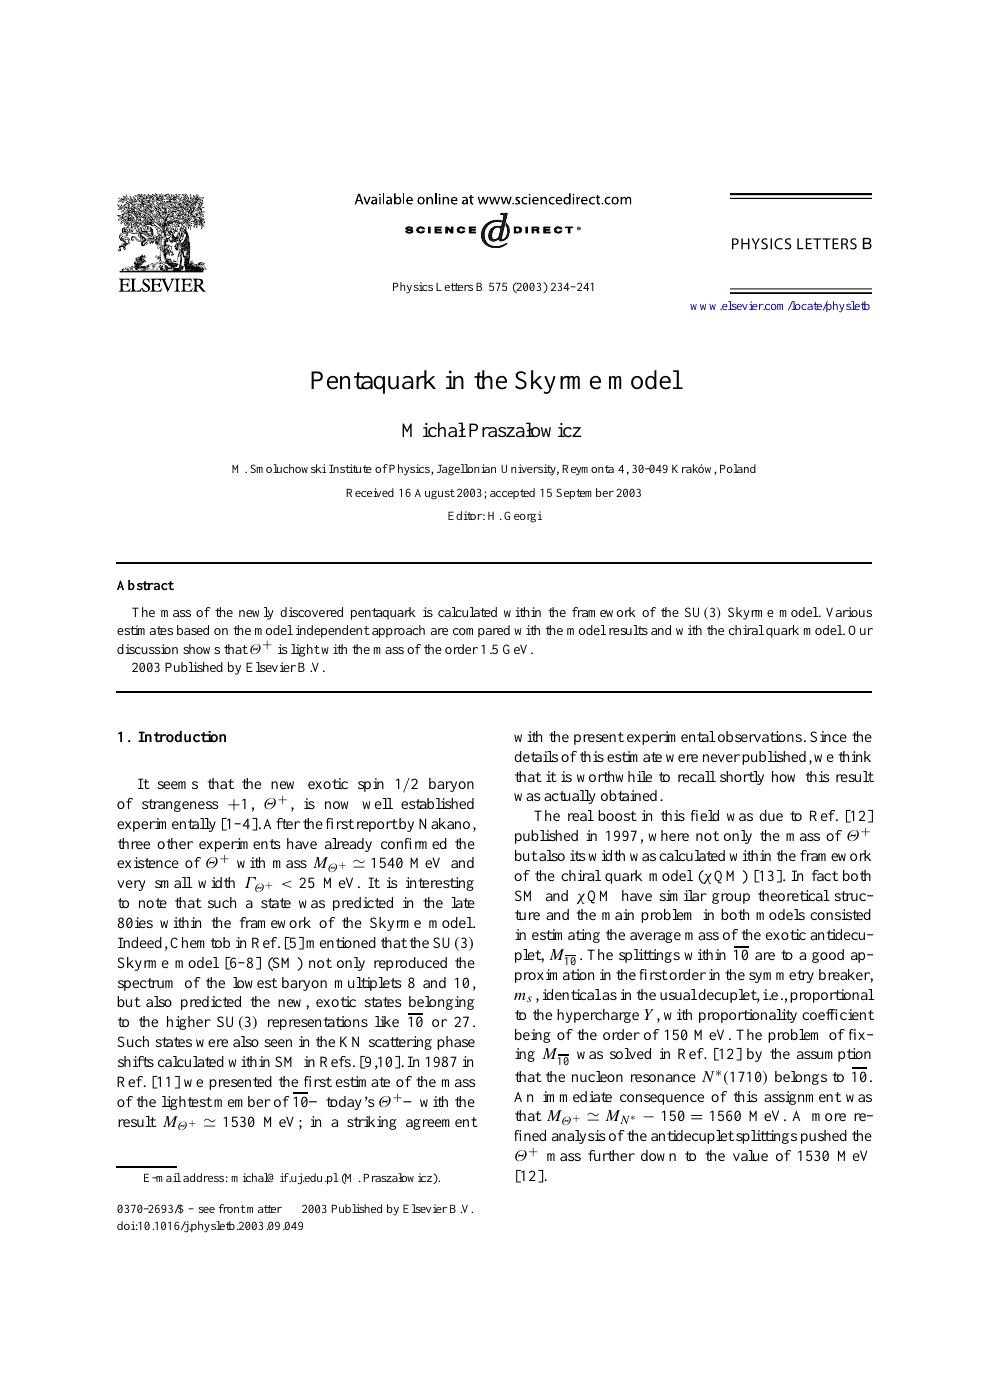 Pentaquark In The Skyrme Model Topic Of Research Paper In Physical Sciences Download Scholarly Article Pdf And Read For Free On Cyberleninka Open Science Hub